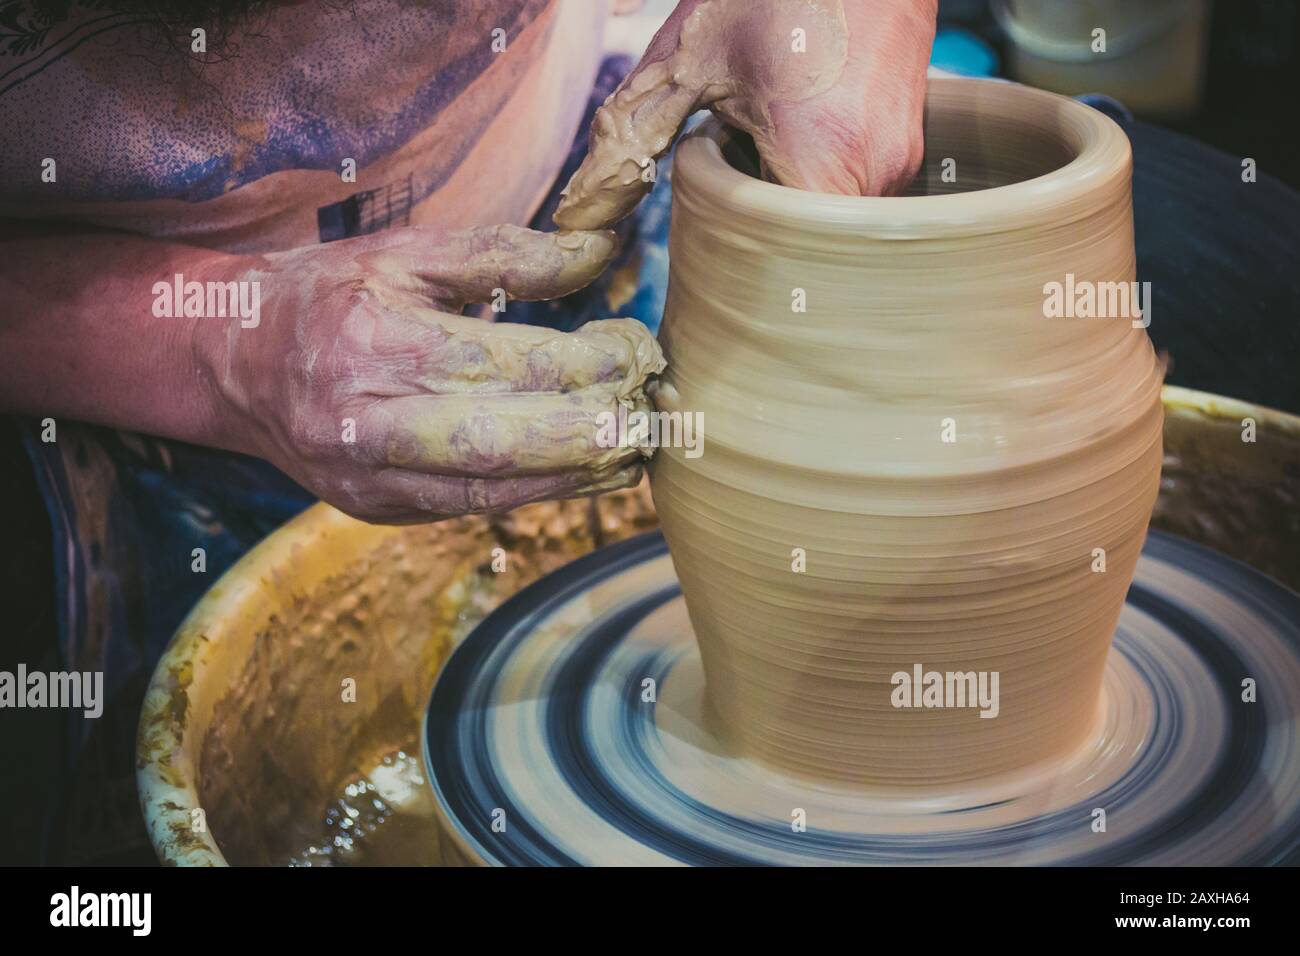 Close-up of woman's hands molding clay on wheel stock photo